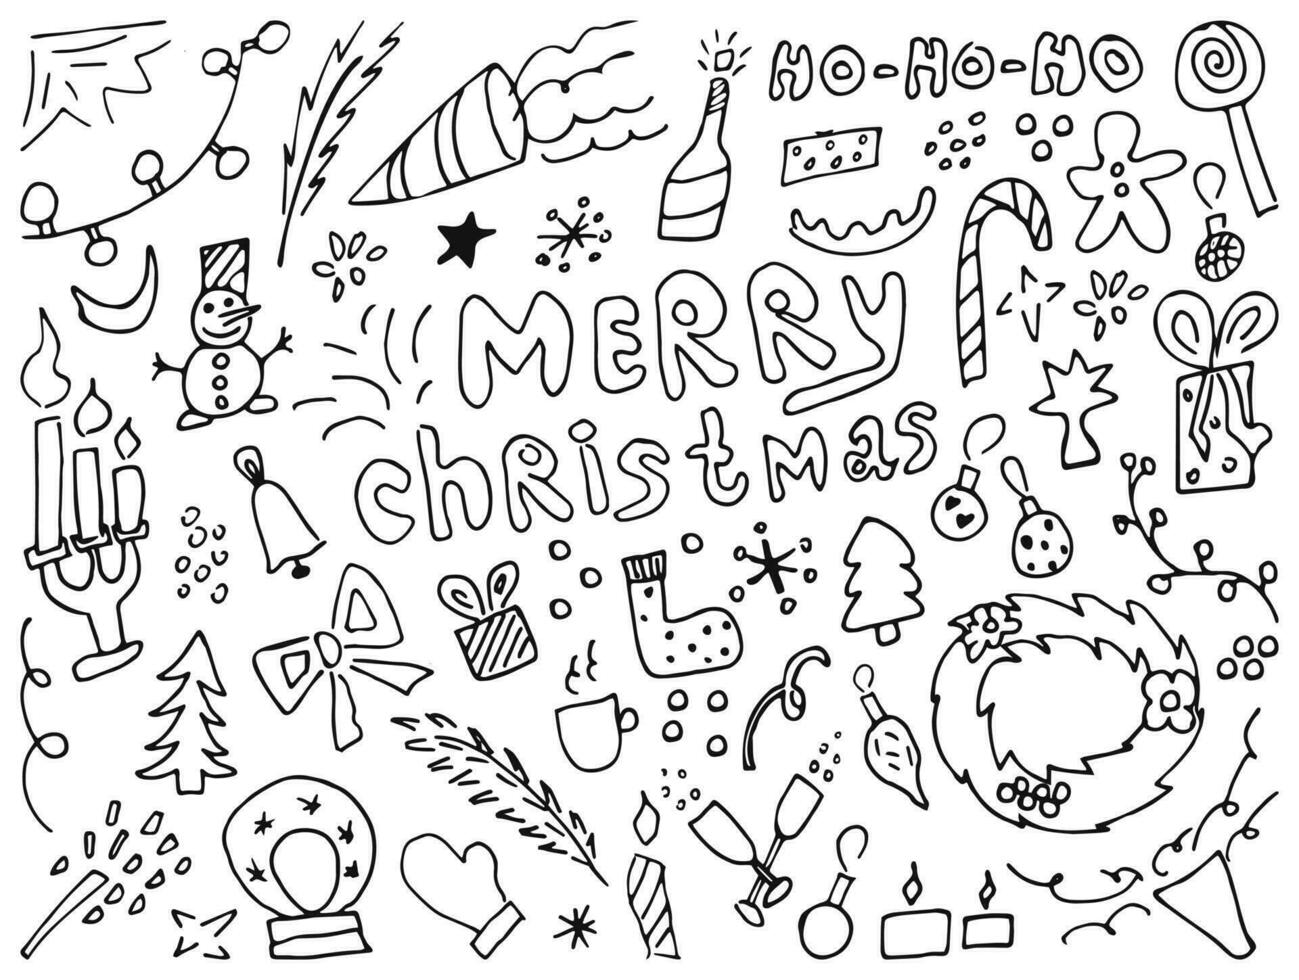 Christmas doodles. Hand drawn xmas illustrations. isolatad white background Winter New Year black outline. Modern design for holiday greeting card, gift tag, label, sticker, banner, poster, postcard vector